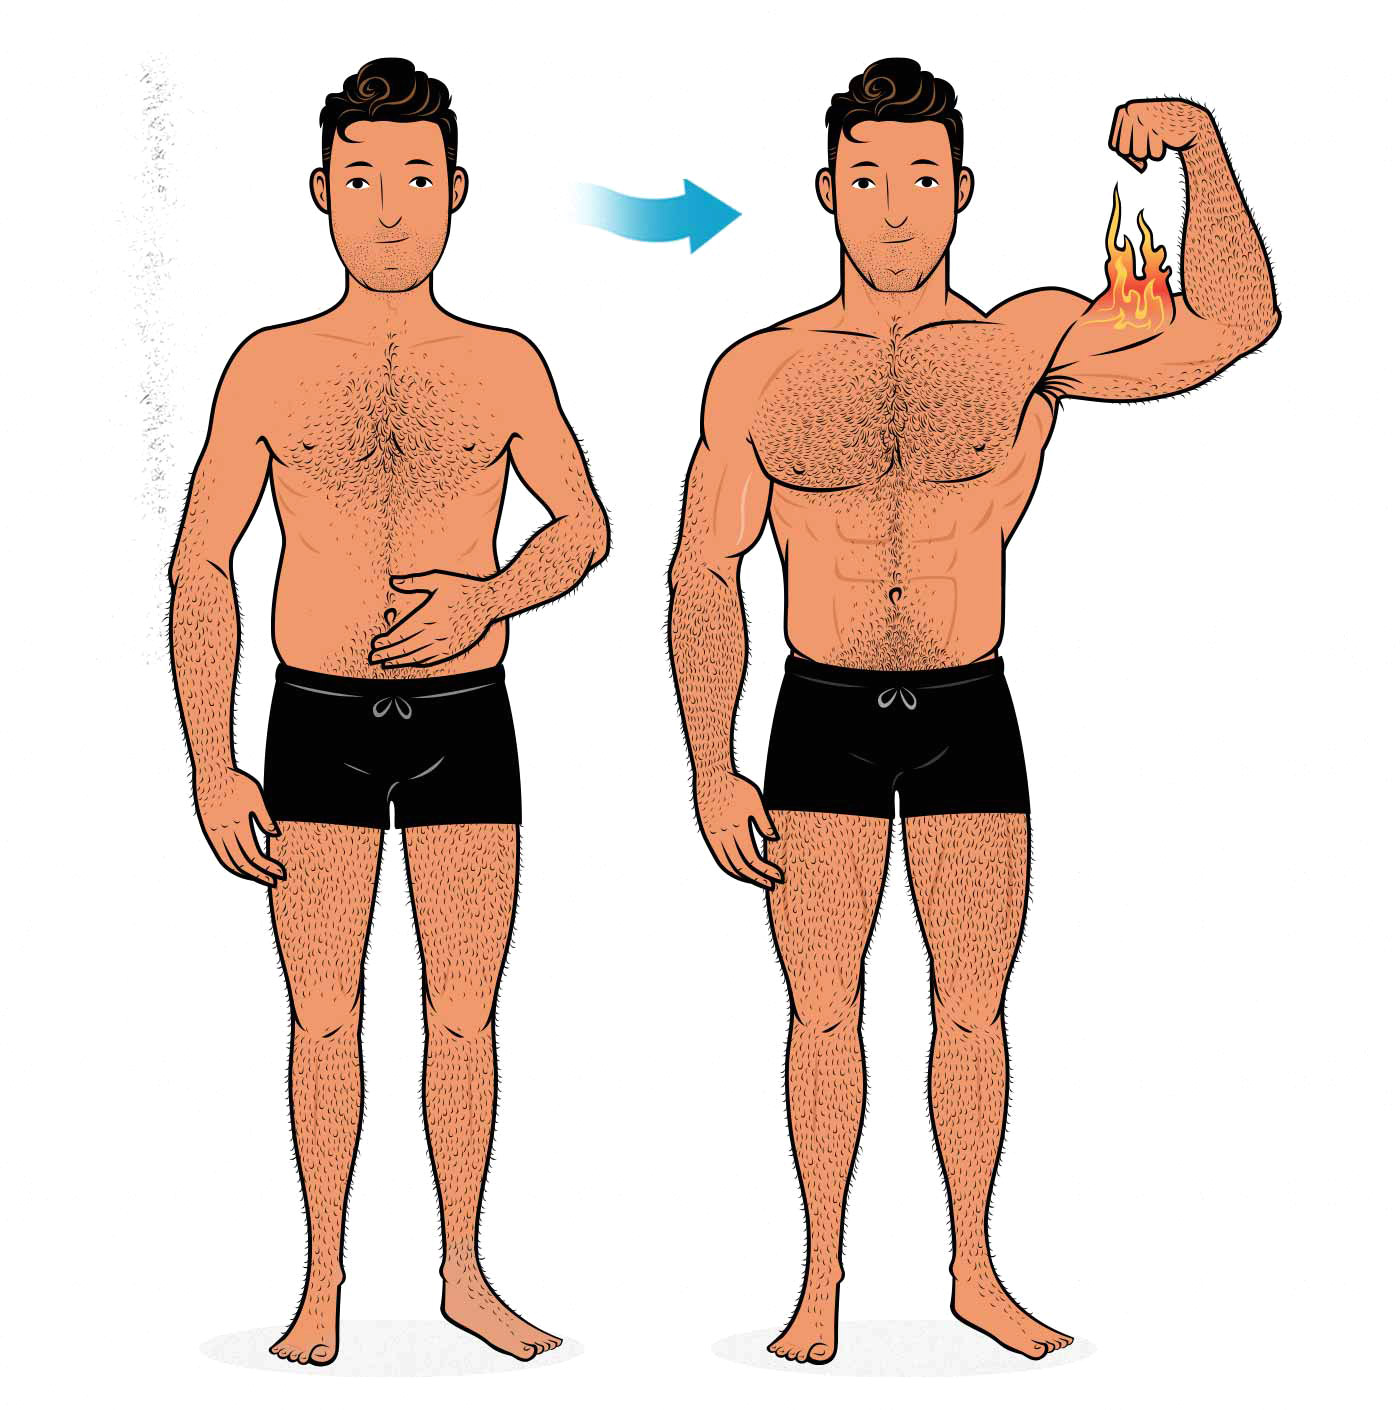 Illustration of a skinny fat man bulking and cutting to become muscular.